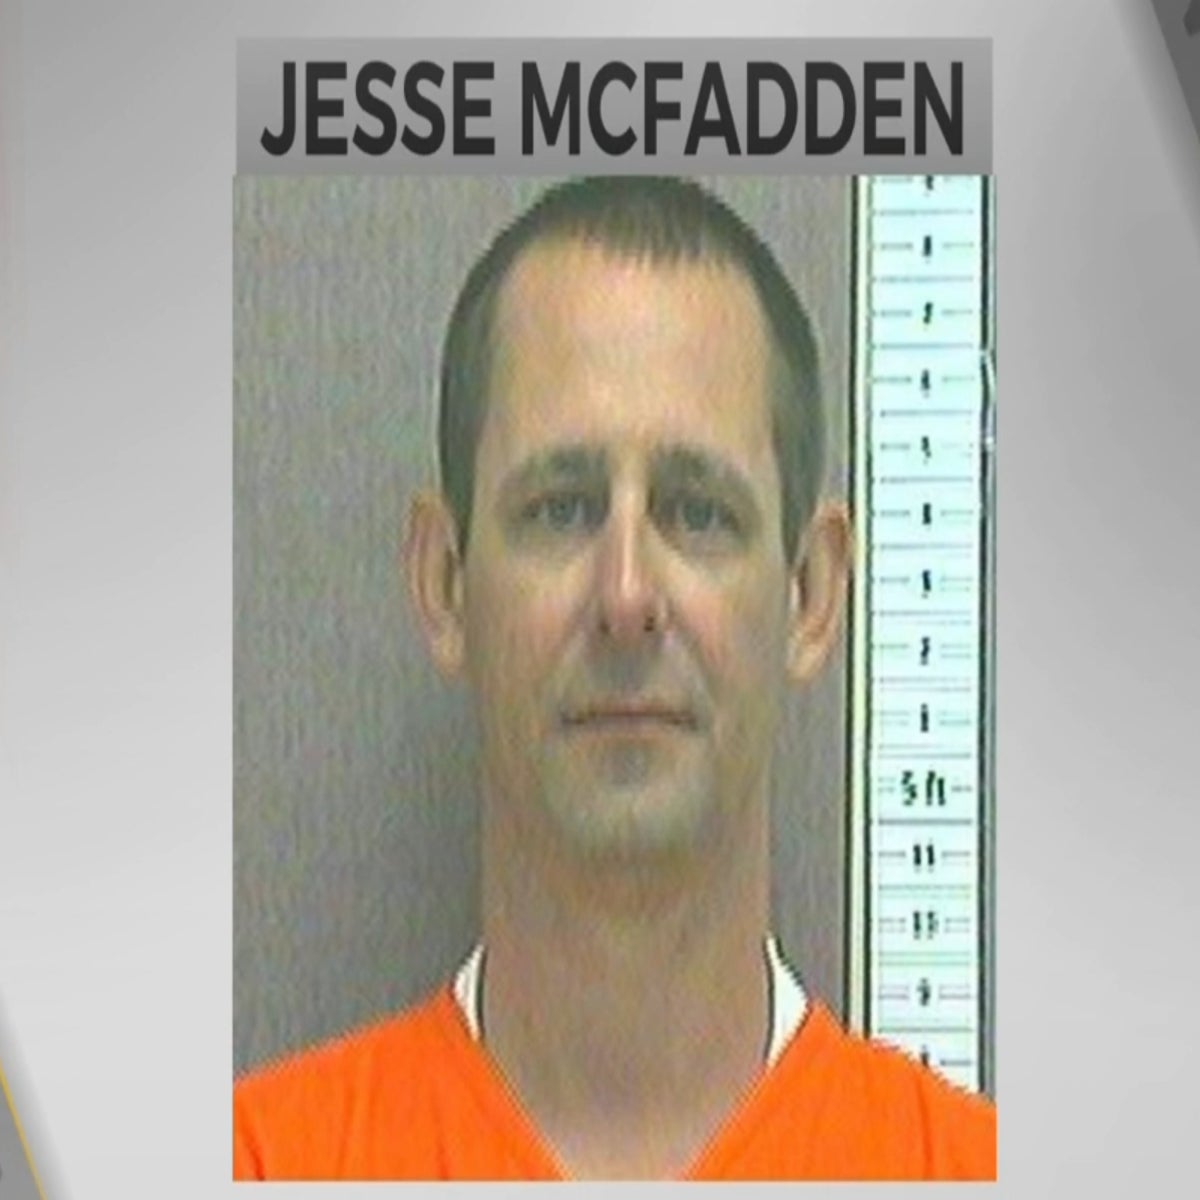 Jesse McFadden: Who is the convicted rapist among seven bodies found in  Oklahoma? | The Independent